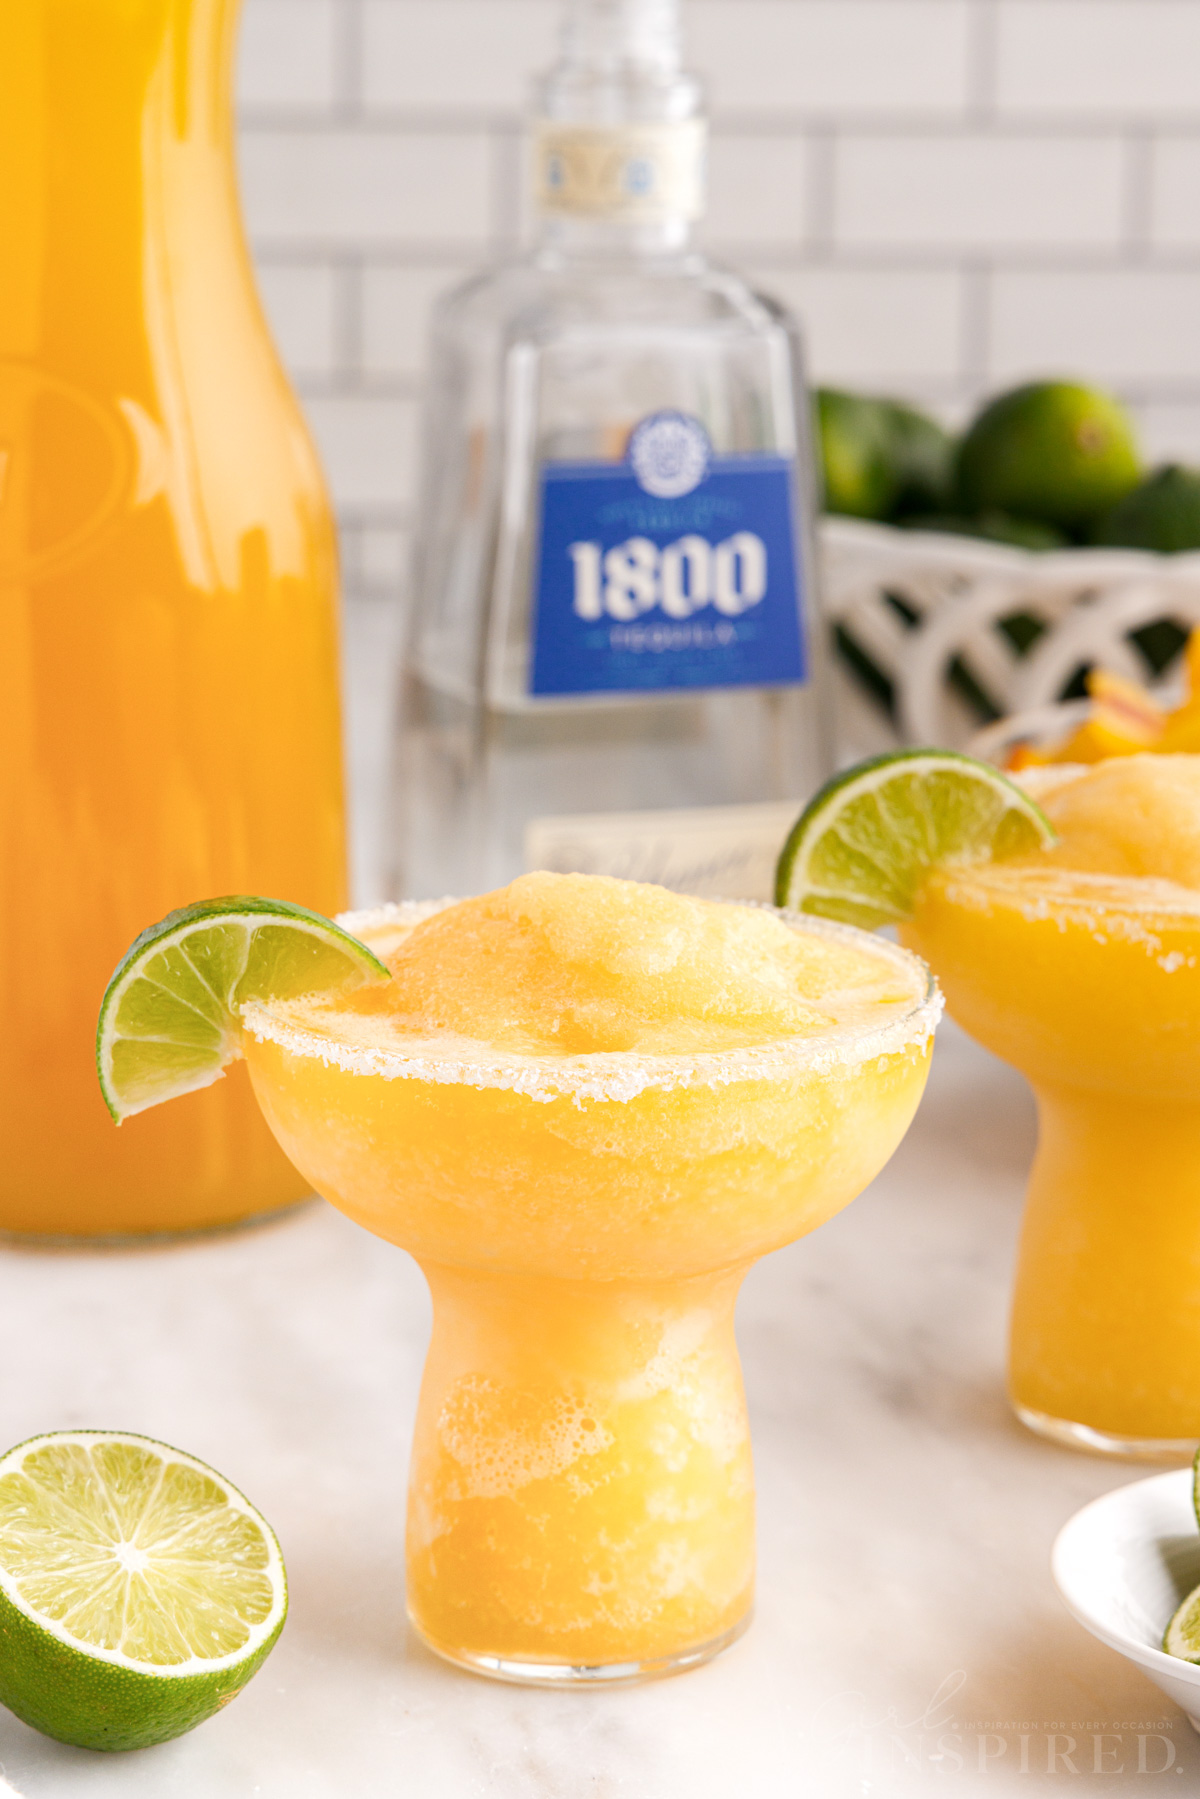 Frozen peach margaritas mounded in margarita glasses with lime wedges, bottle of 1800 tequila, jar of peach juice, bowl of limes.